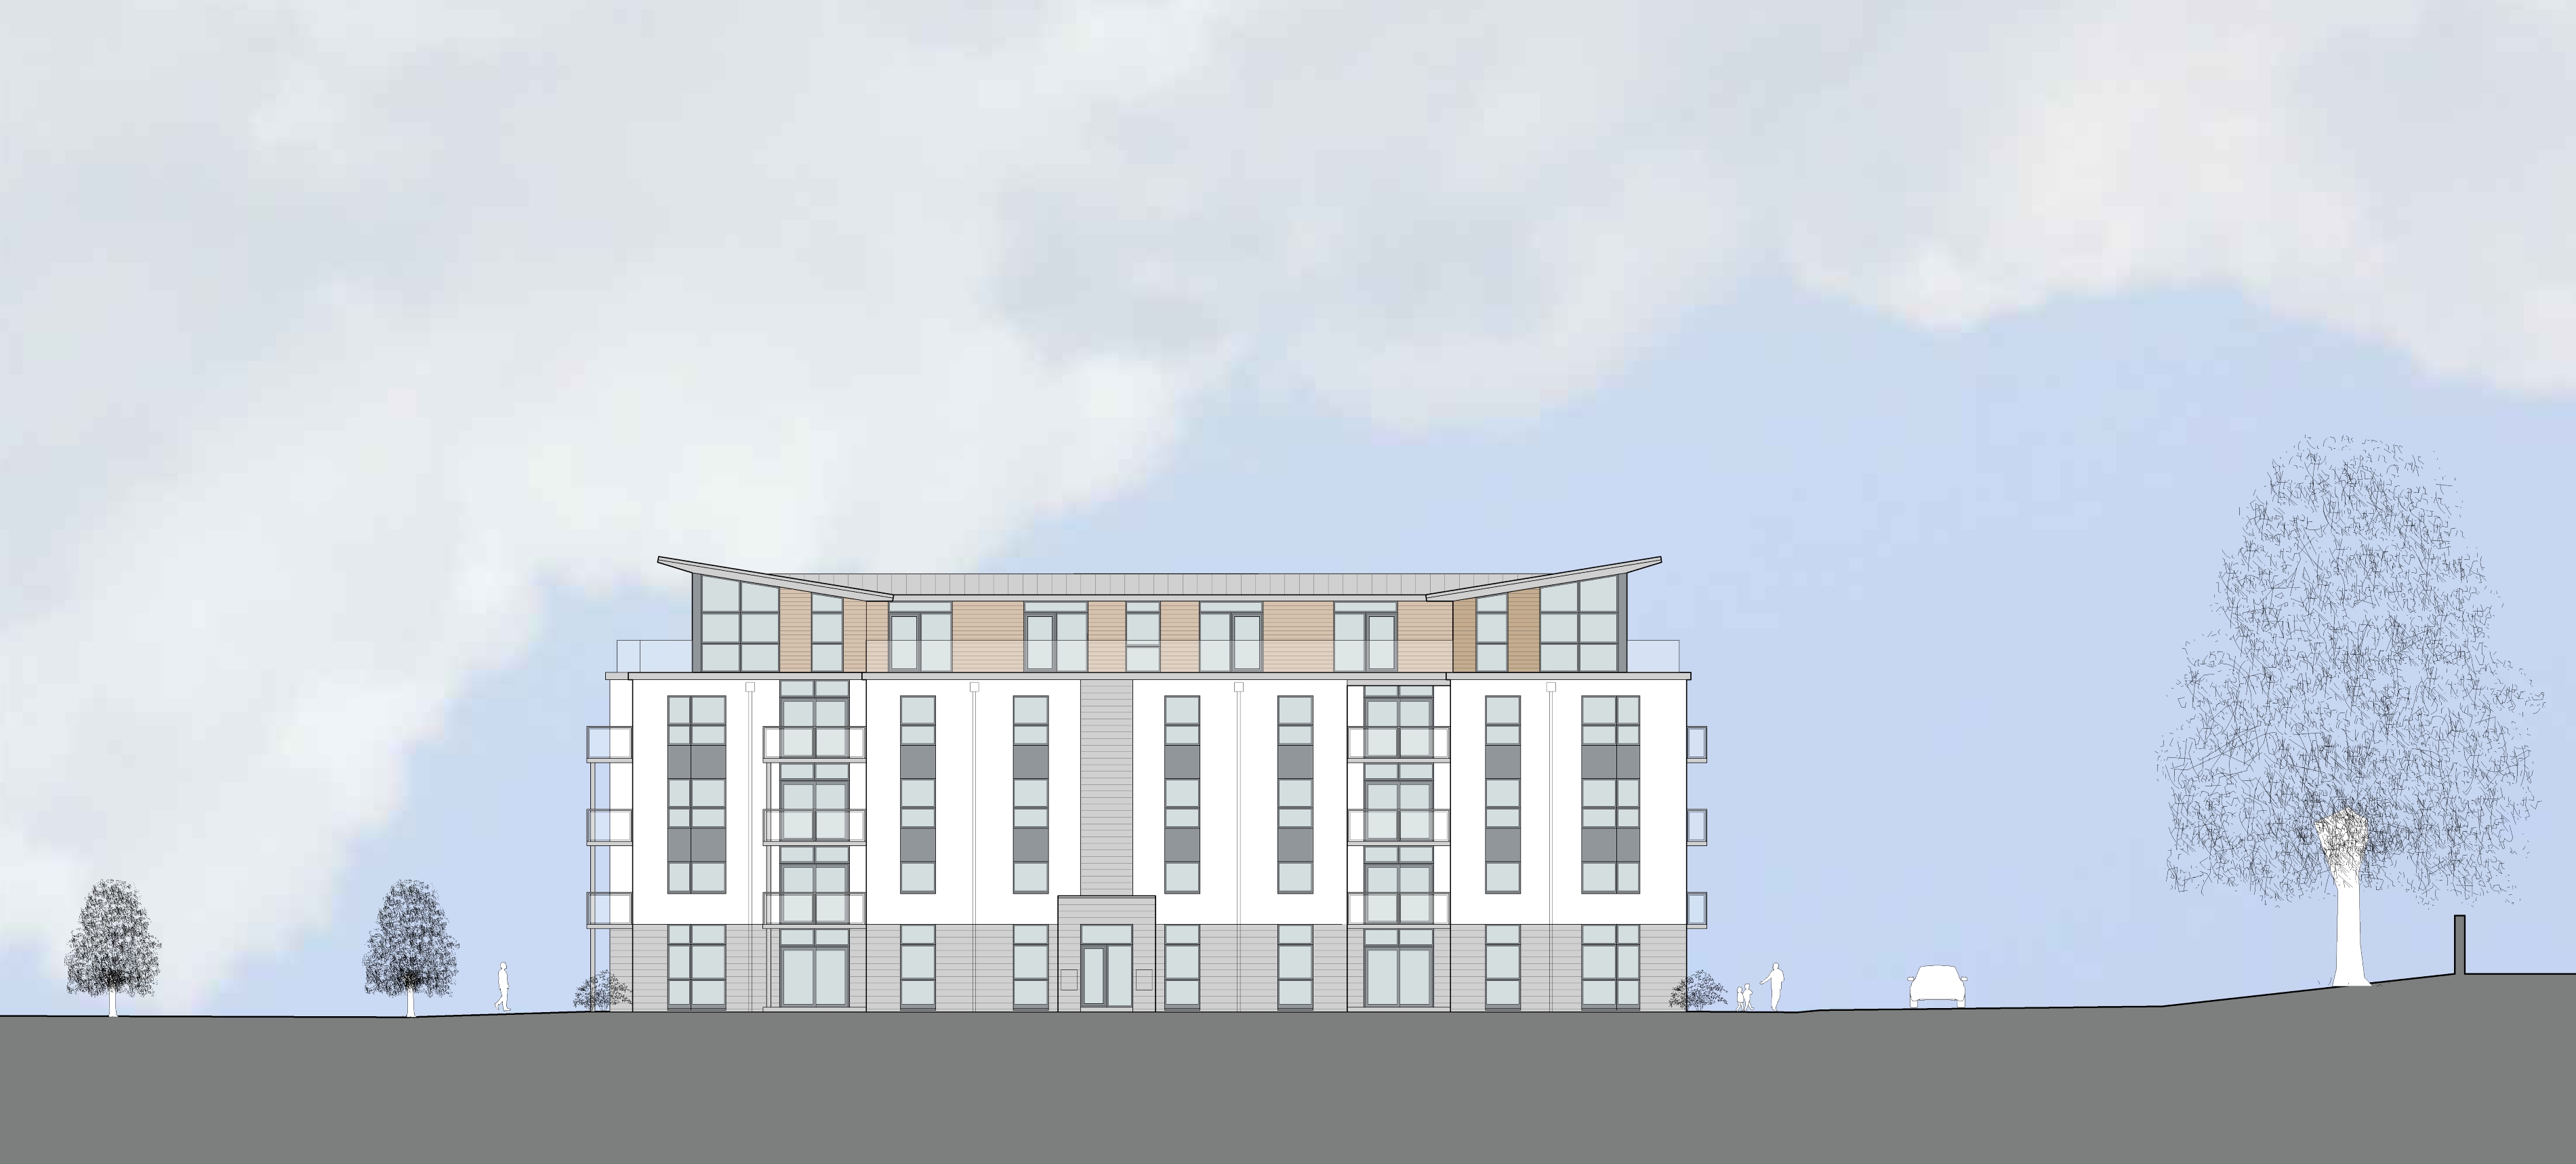 CALA Homes submits revised plans for Aberdeen city centre apartments